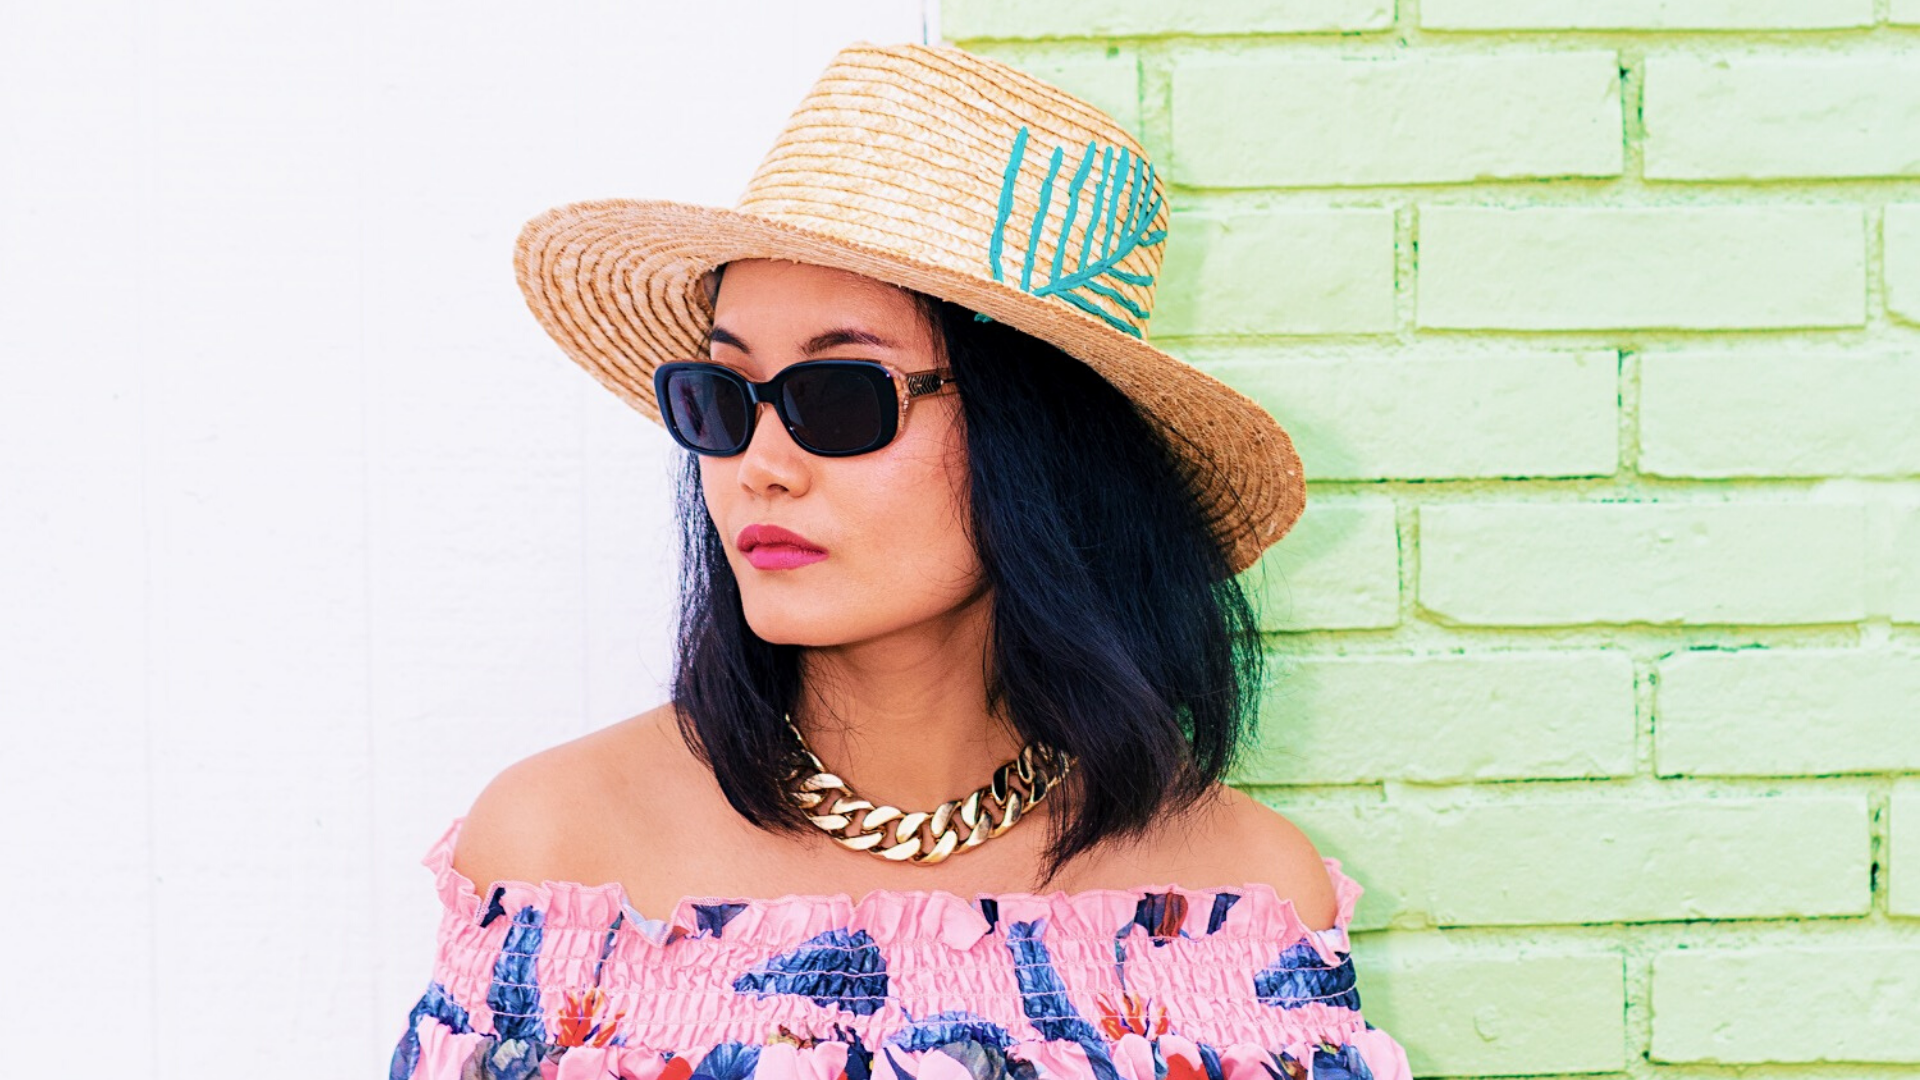 https://nanphanita.com/wp-content/uploads/2020/07/Nanphanita-on-a-Saving-Spree_-Finding-Summer-Hats-at-San-Diego-Hat-Company-How-to-Style-Them.png